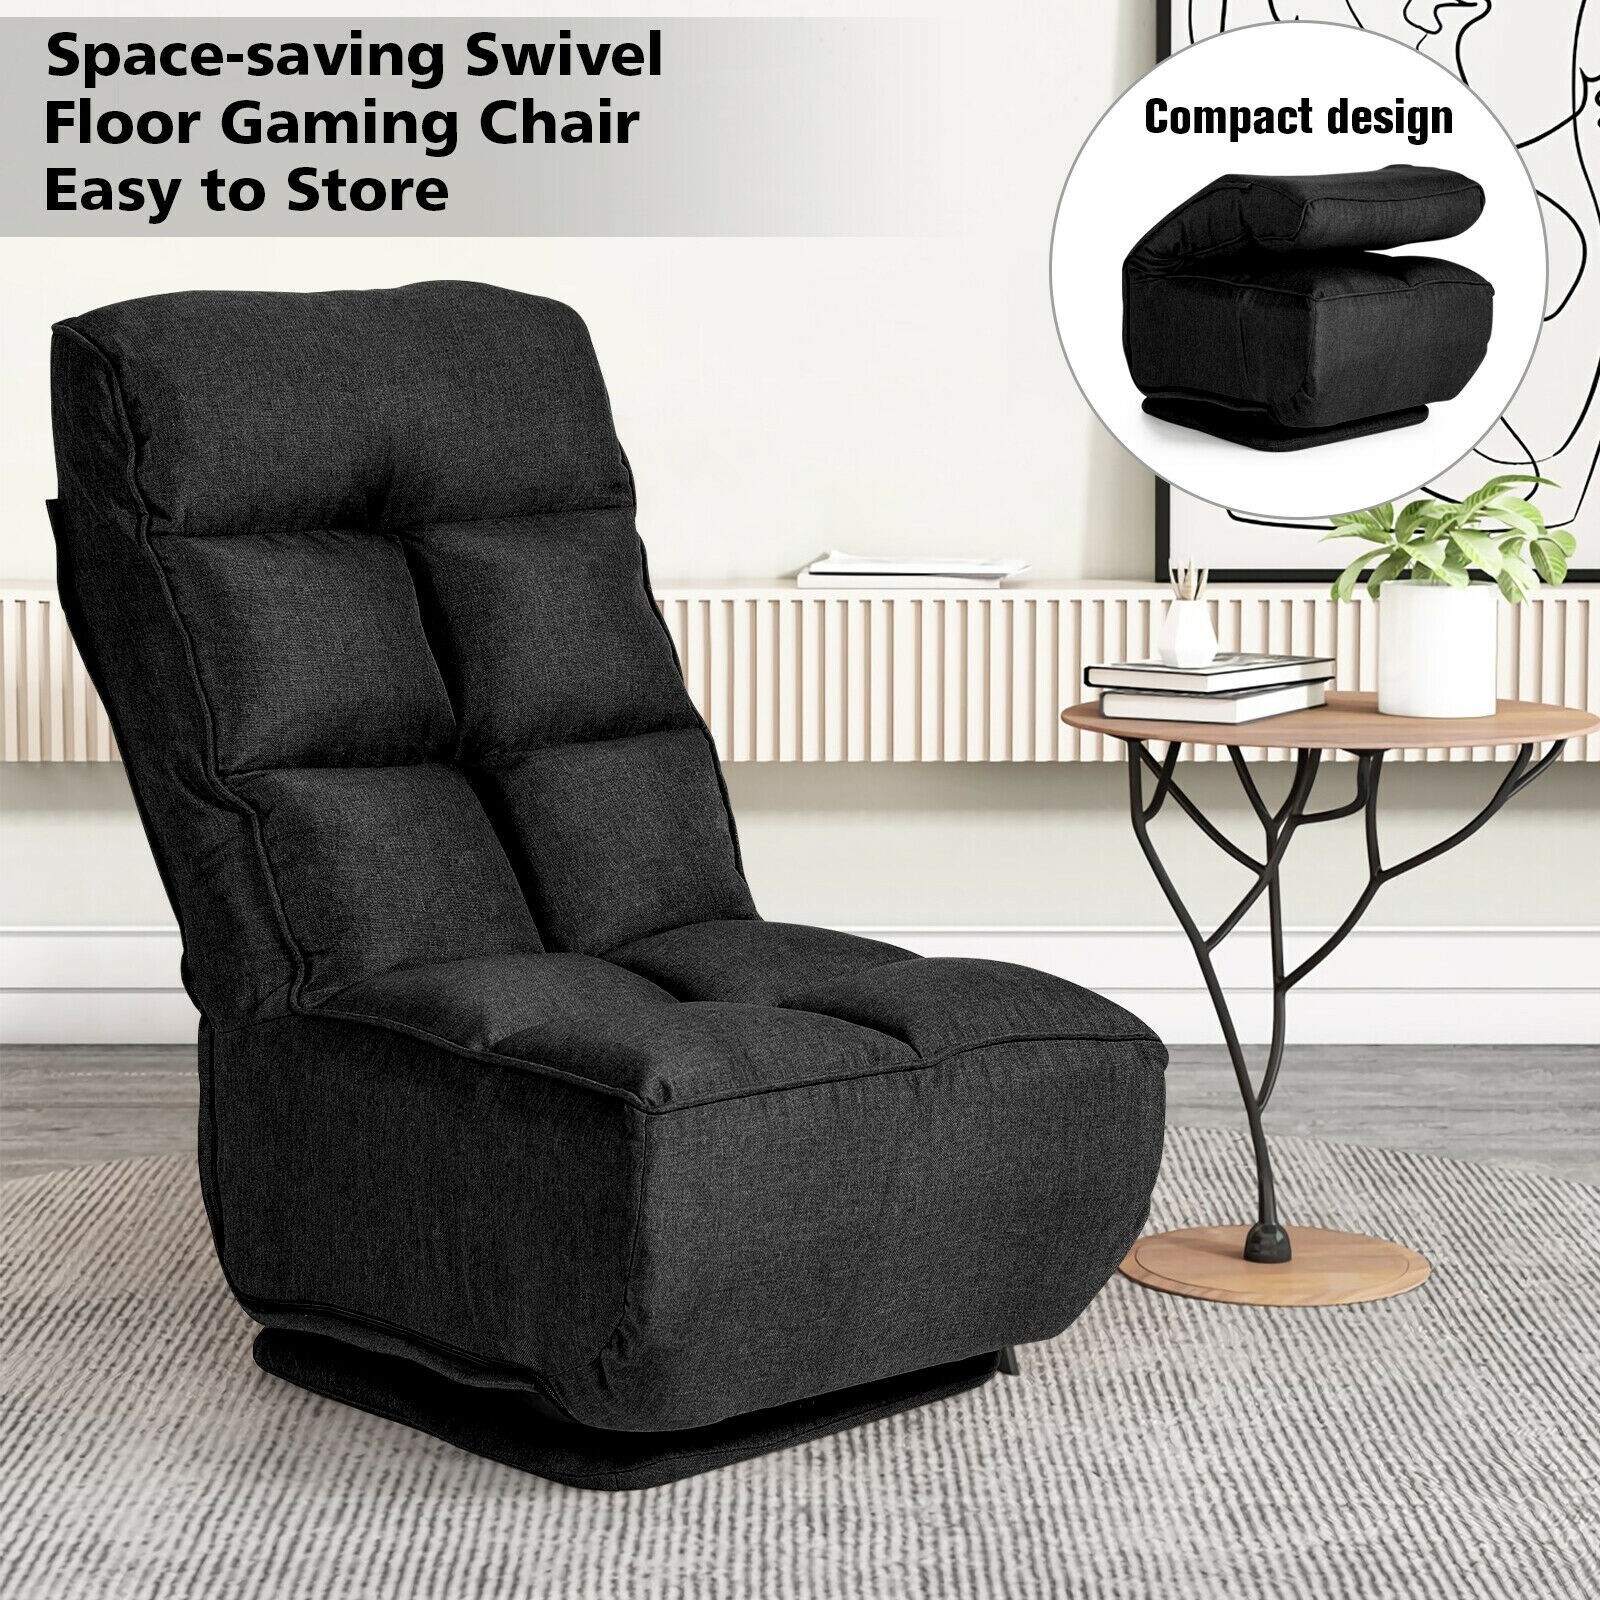 Tufted Linen Cushion Reading Foldable Floor Sofa Black 360-Degree Swivel Lazy Sofa Floor Chair w/ 6 Adjustable Positions Video Gaming Chair for TV Giantex Folding Floor Gaming Chair 